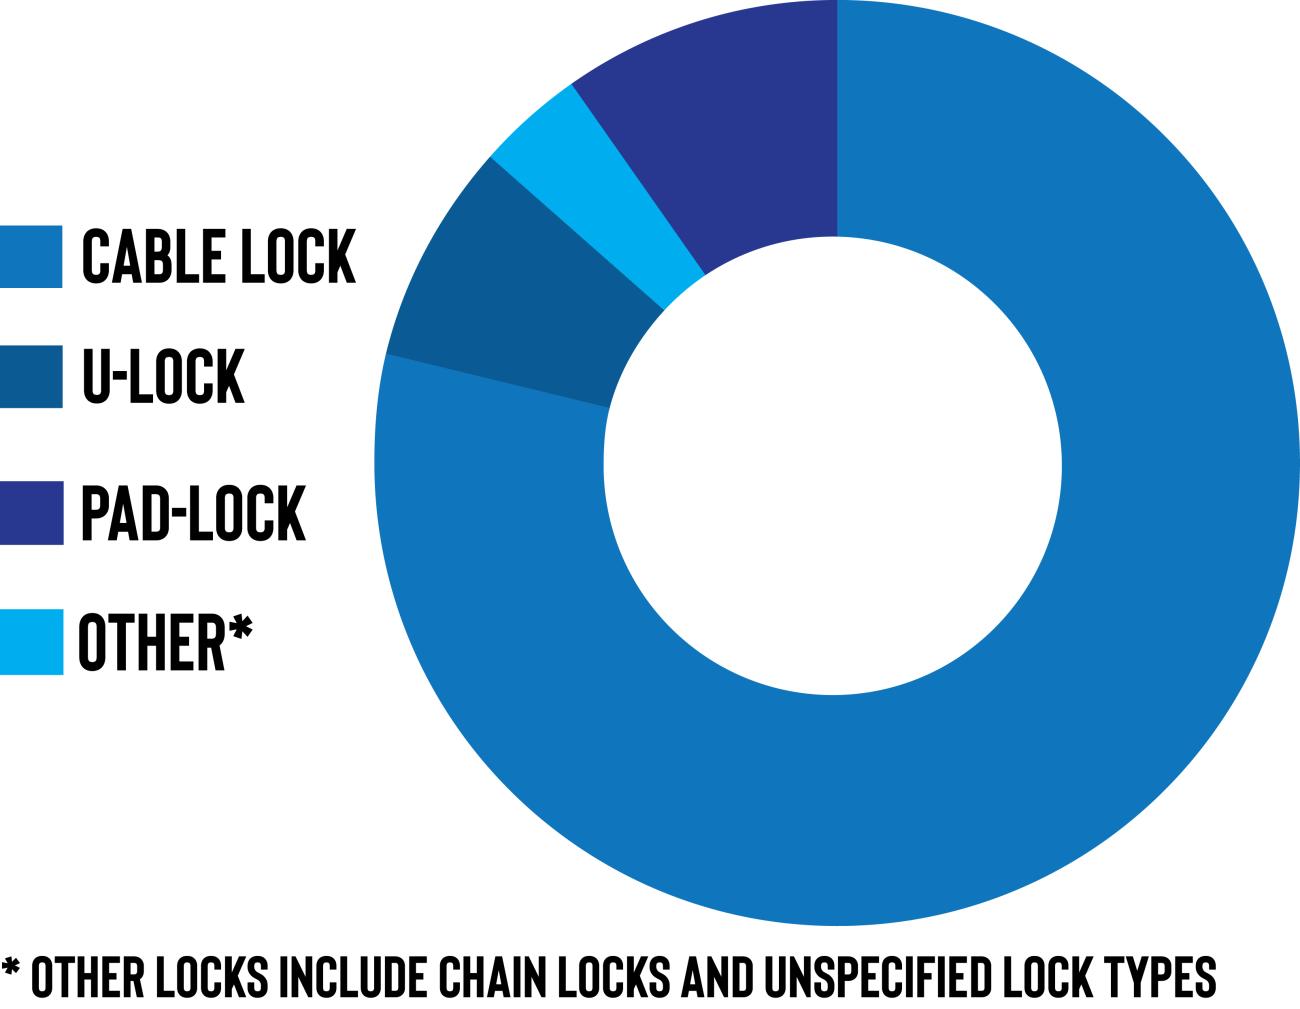 Pie chart showing bike theft by lock type with cable locks representing 79% of thefts, u-locks 10%, pad-locks 8%, and other being 3%